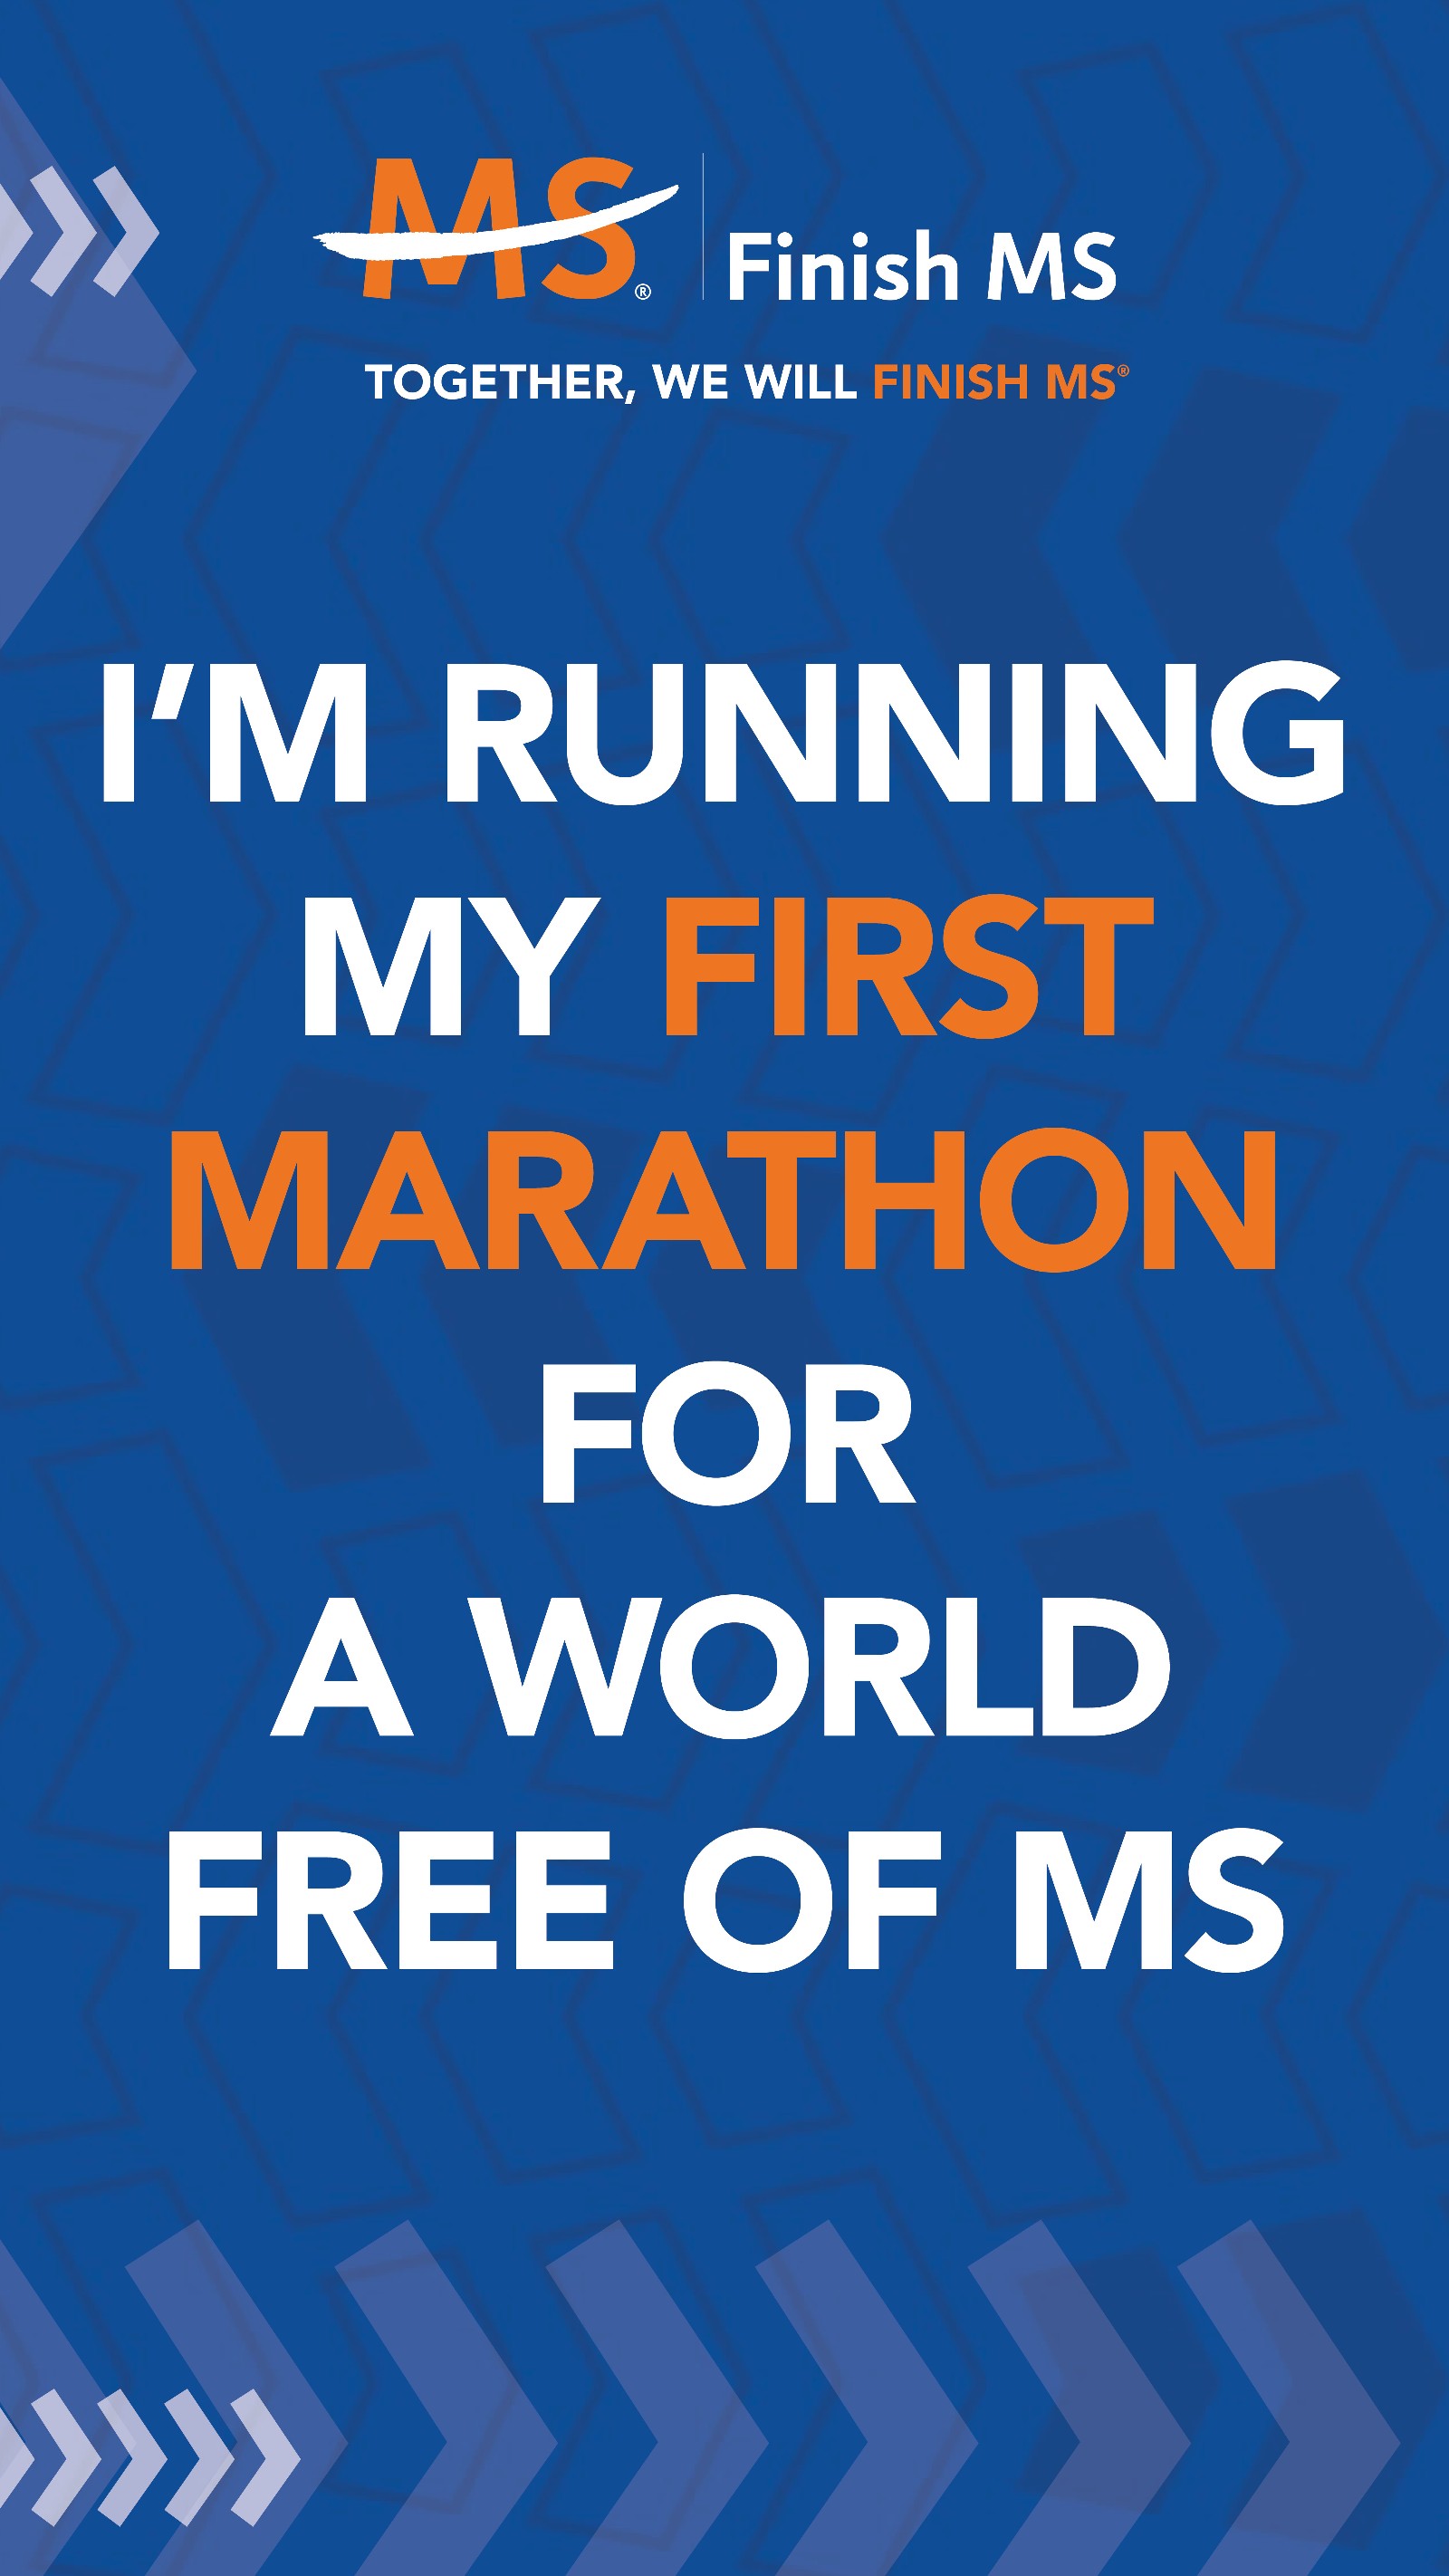 Finish MS - I'm running my first marathon for a world free of MS v3